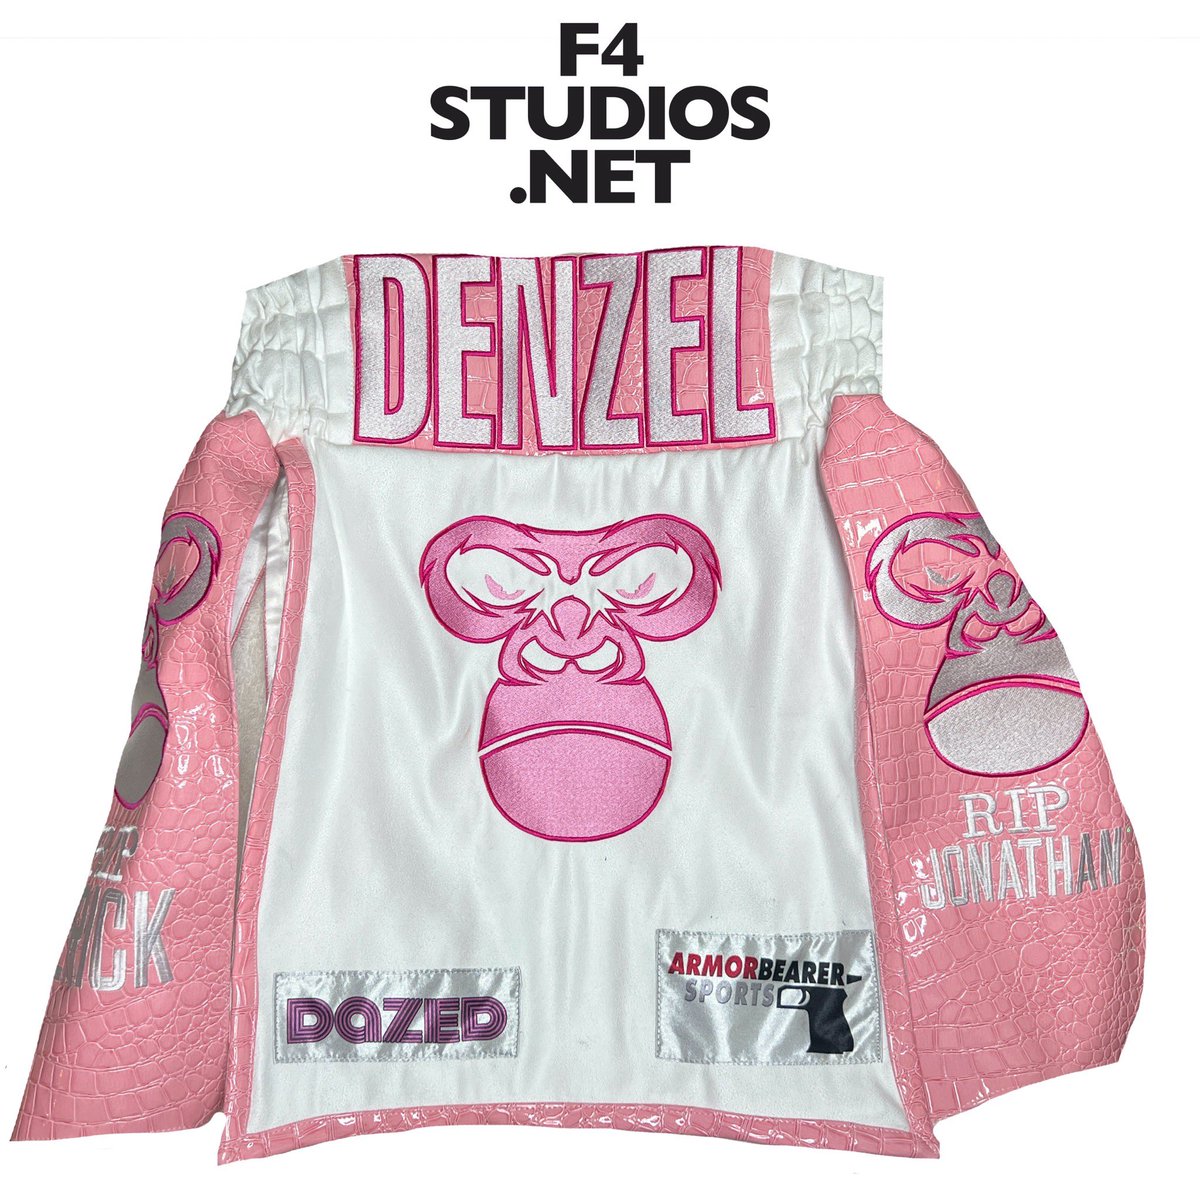 Custom Pink Gator / Suede Outfit for Denzel Whitley @denzelwhitley @whityourgirl #F4STUDIOS  #customboxingoutfits #boxingoutfits #boxingoutfit #customboxingkits  #boxinguniforms #boxingtrunks  #boxingshorts #boxeo #boxinggear #customboxinguniforms #ringattire  #denzelwhitley